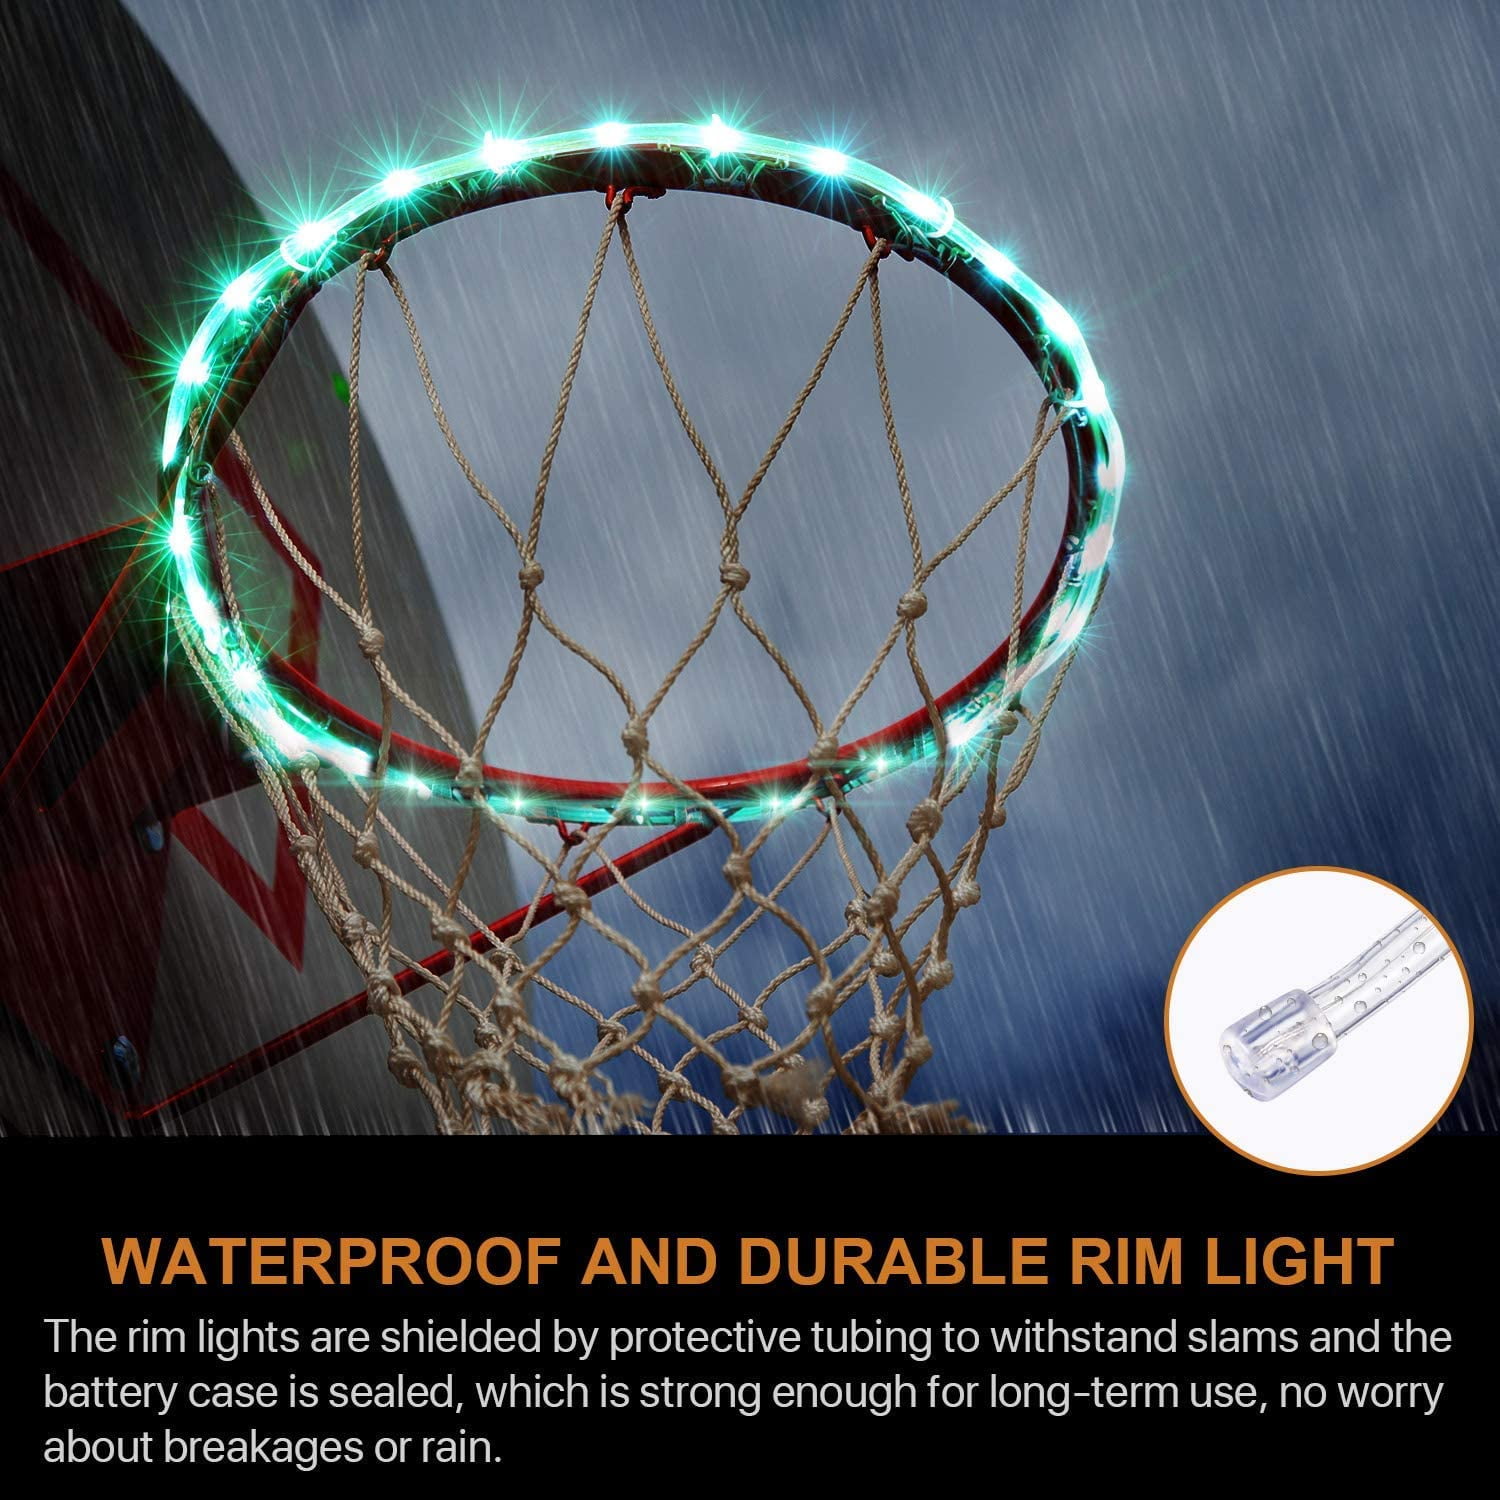 TIKSCIENCE Led Basketball Hoop Light Remote Control Basketball Rim and Pole Lights Basketball Lights Set 16 Color Change Waterproof Bright Play at Night Outdoor Kids Gift for Training 